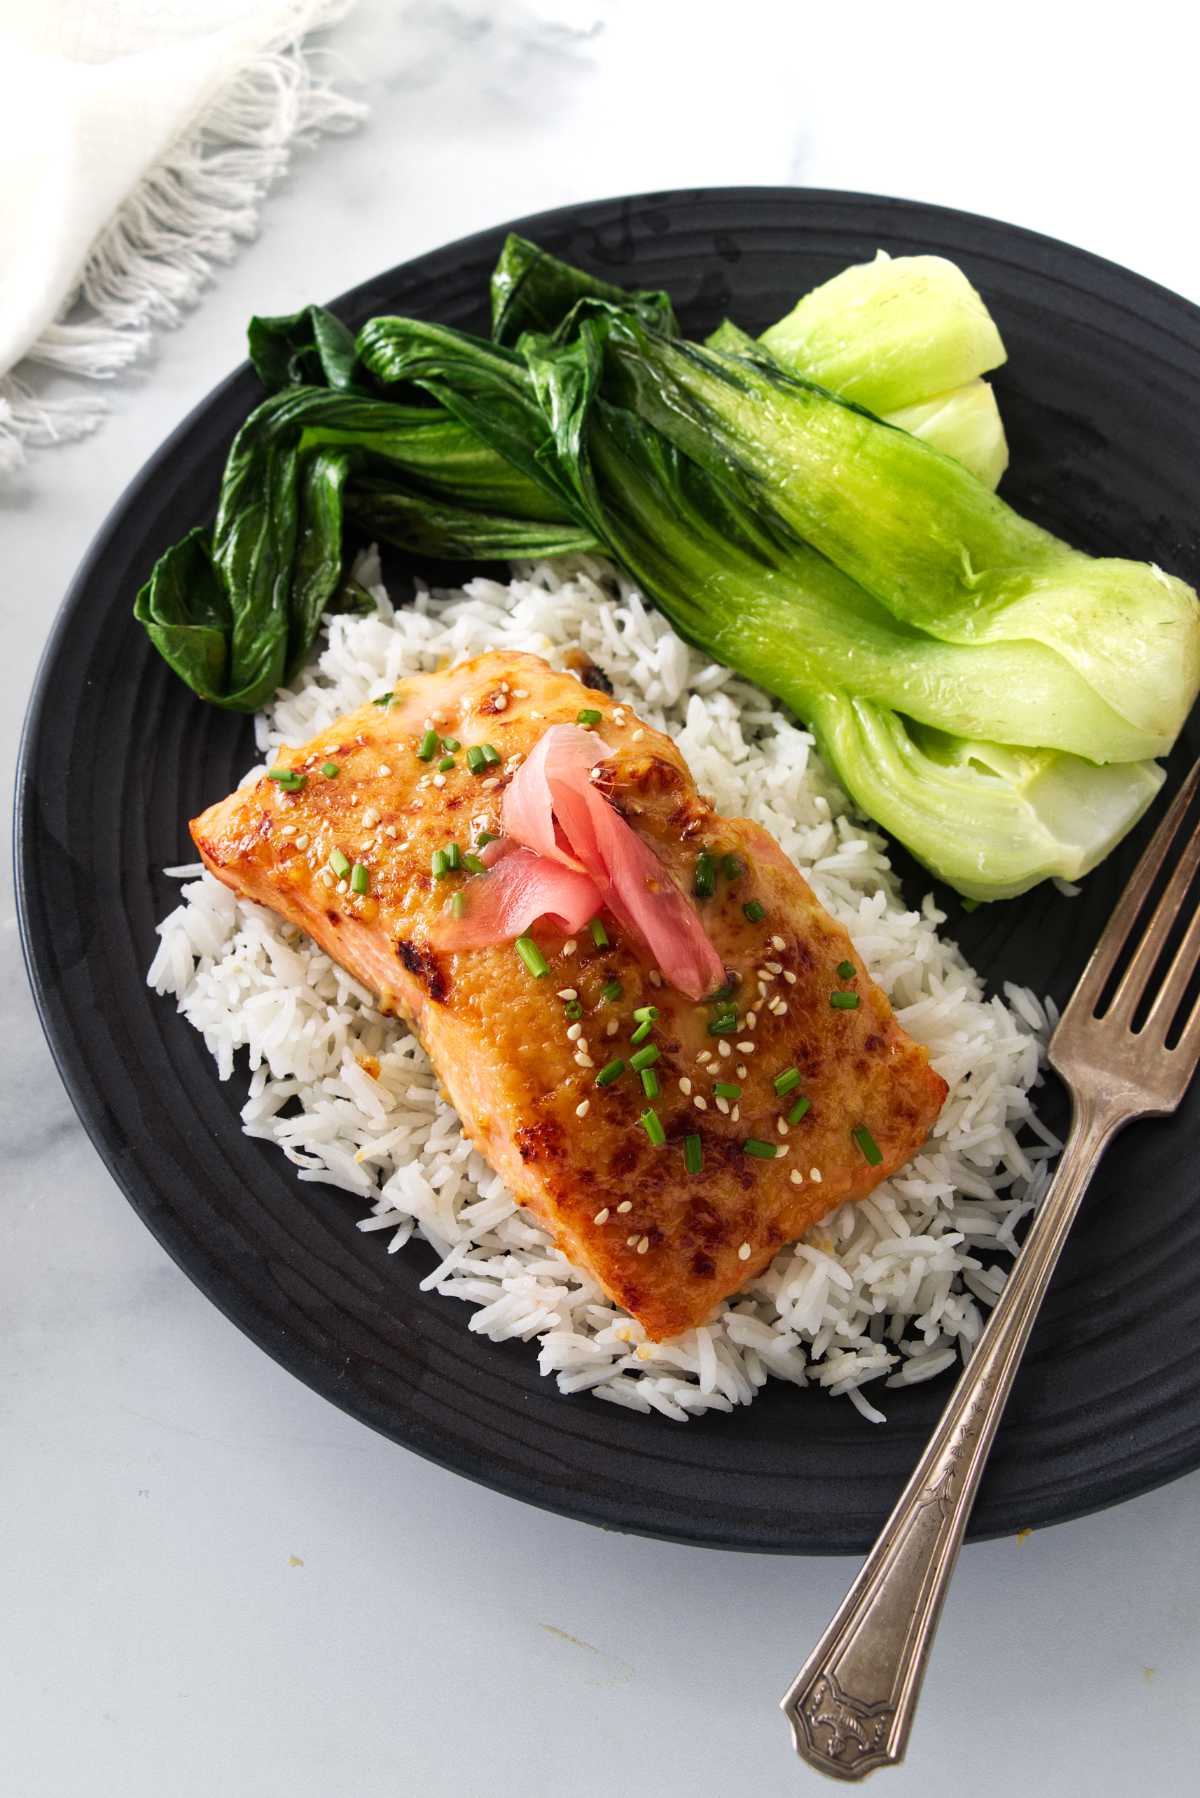 Overhead view of a plated serving of miso butter salmon on a mound of rice and steamed bok choy. A dinner fork on the plate and a napkin to the side.